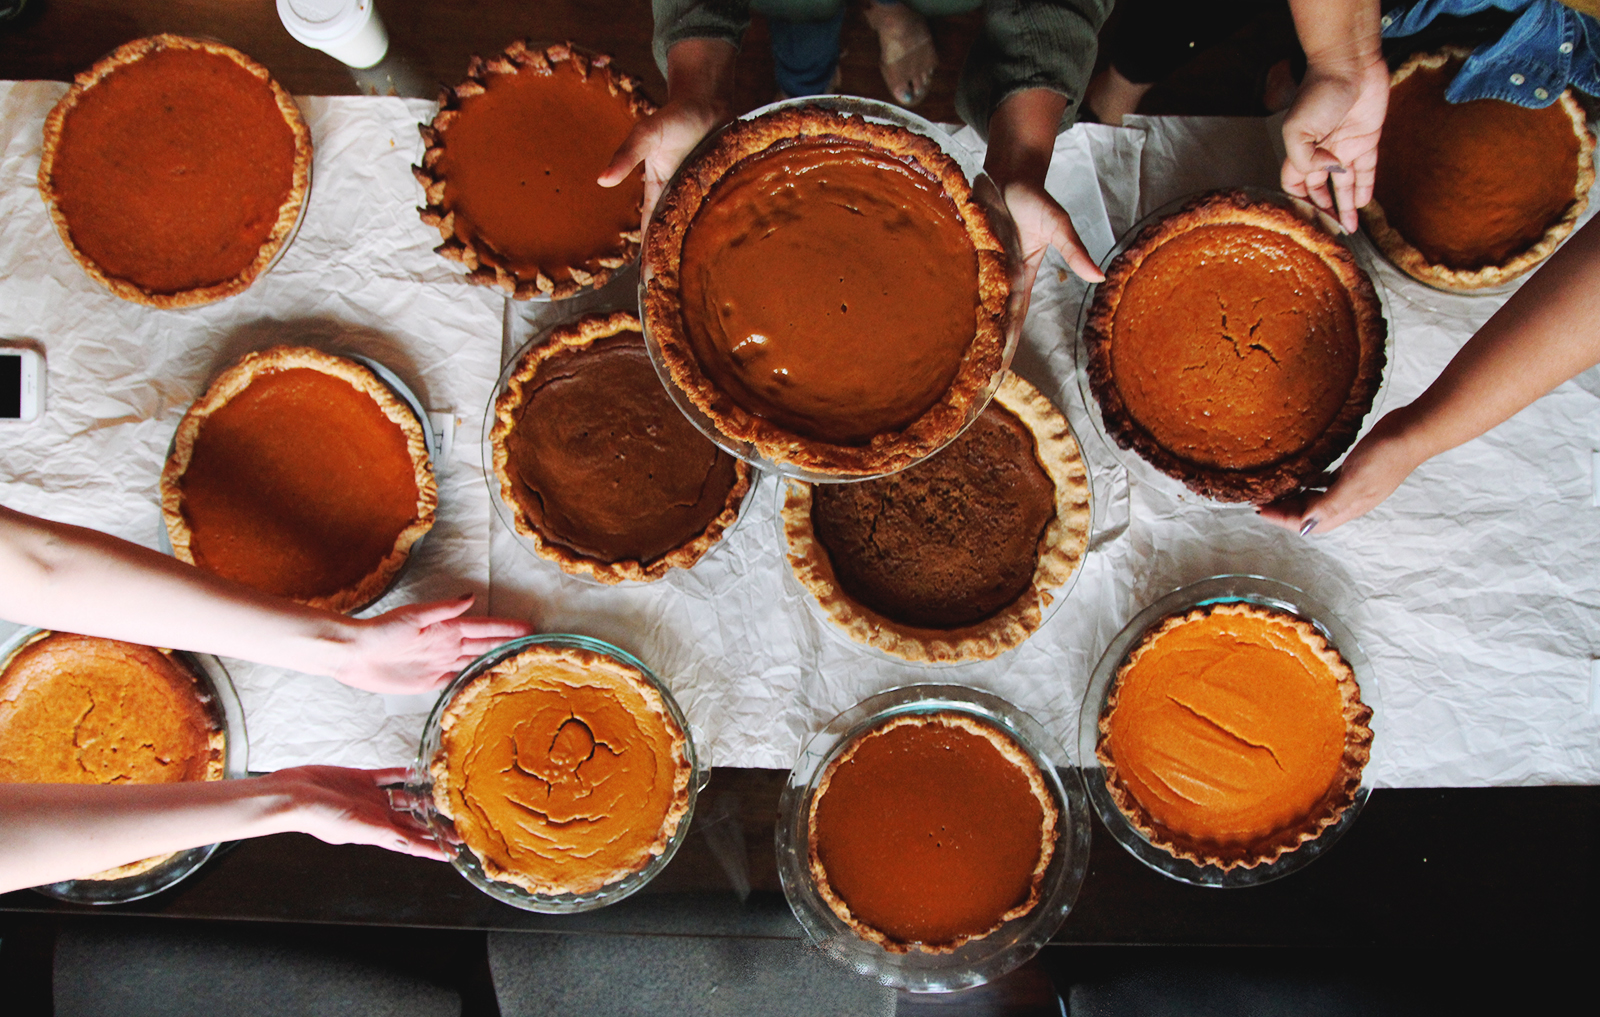 12 different recipes of pumpkin pies being passed around on white tablecloth